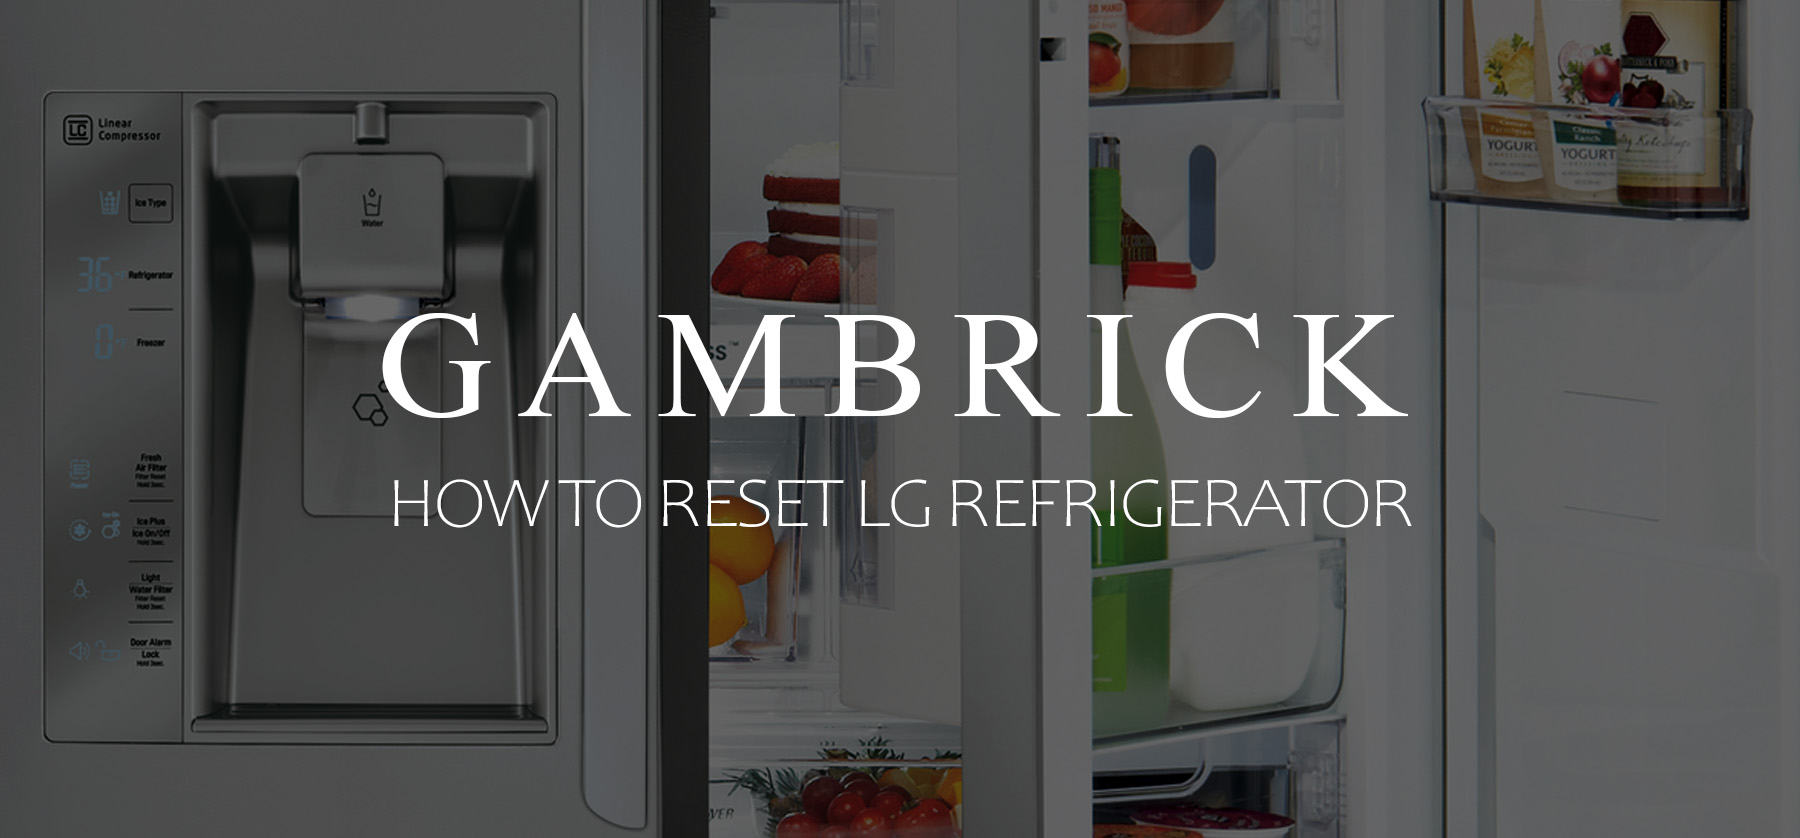 How To Reset LG Refrigerator banner 1.0